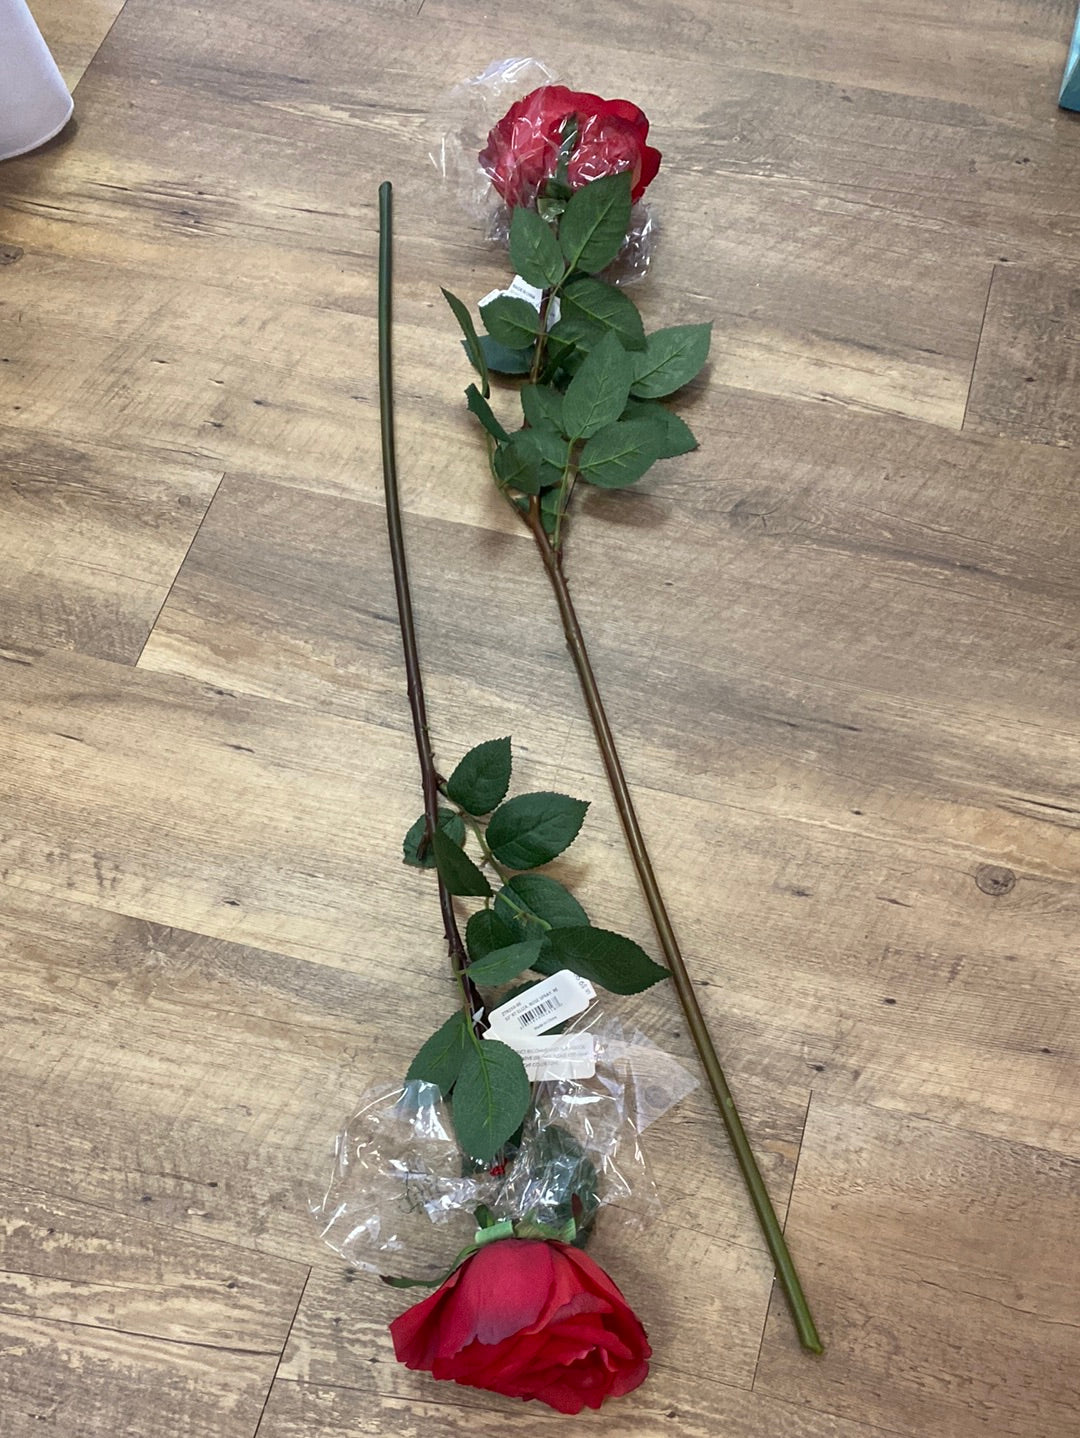 JENW-A 32” Red Rose Stems